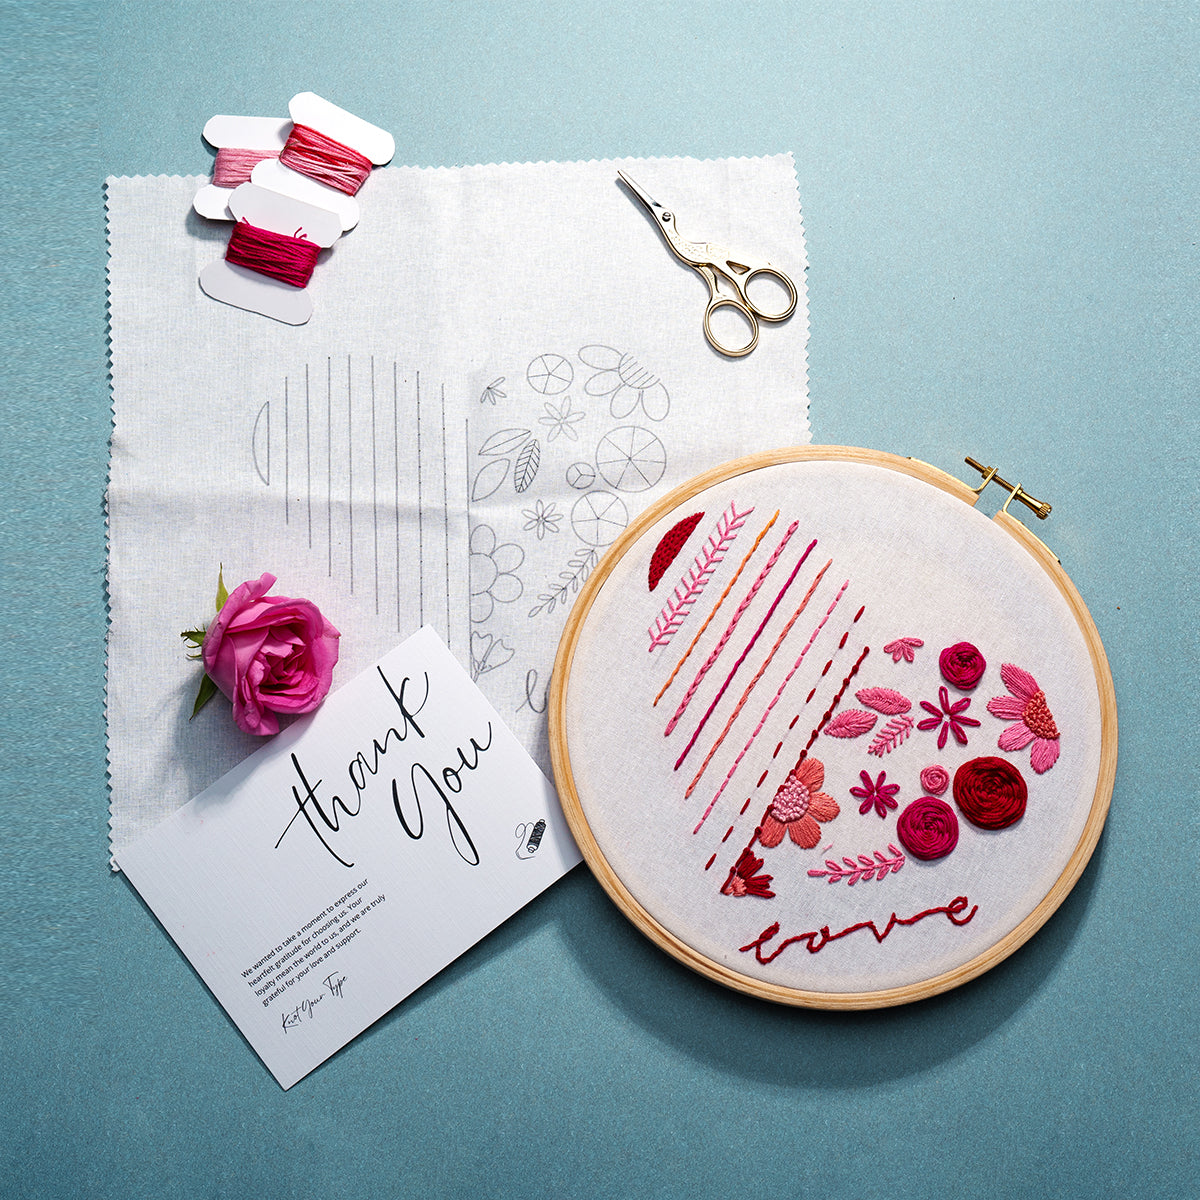 Beginner's Friendly Embroidery Stitches Learning DIY Kit